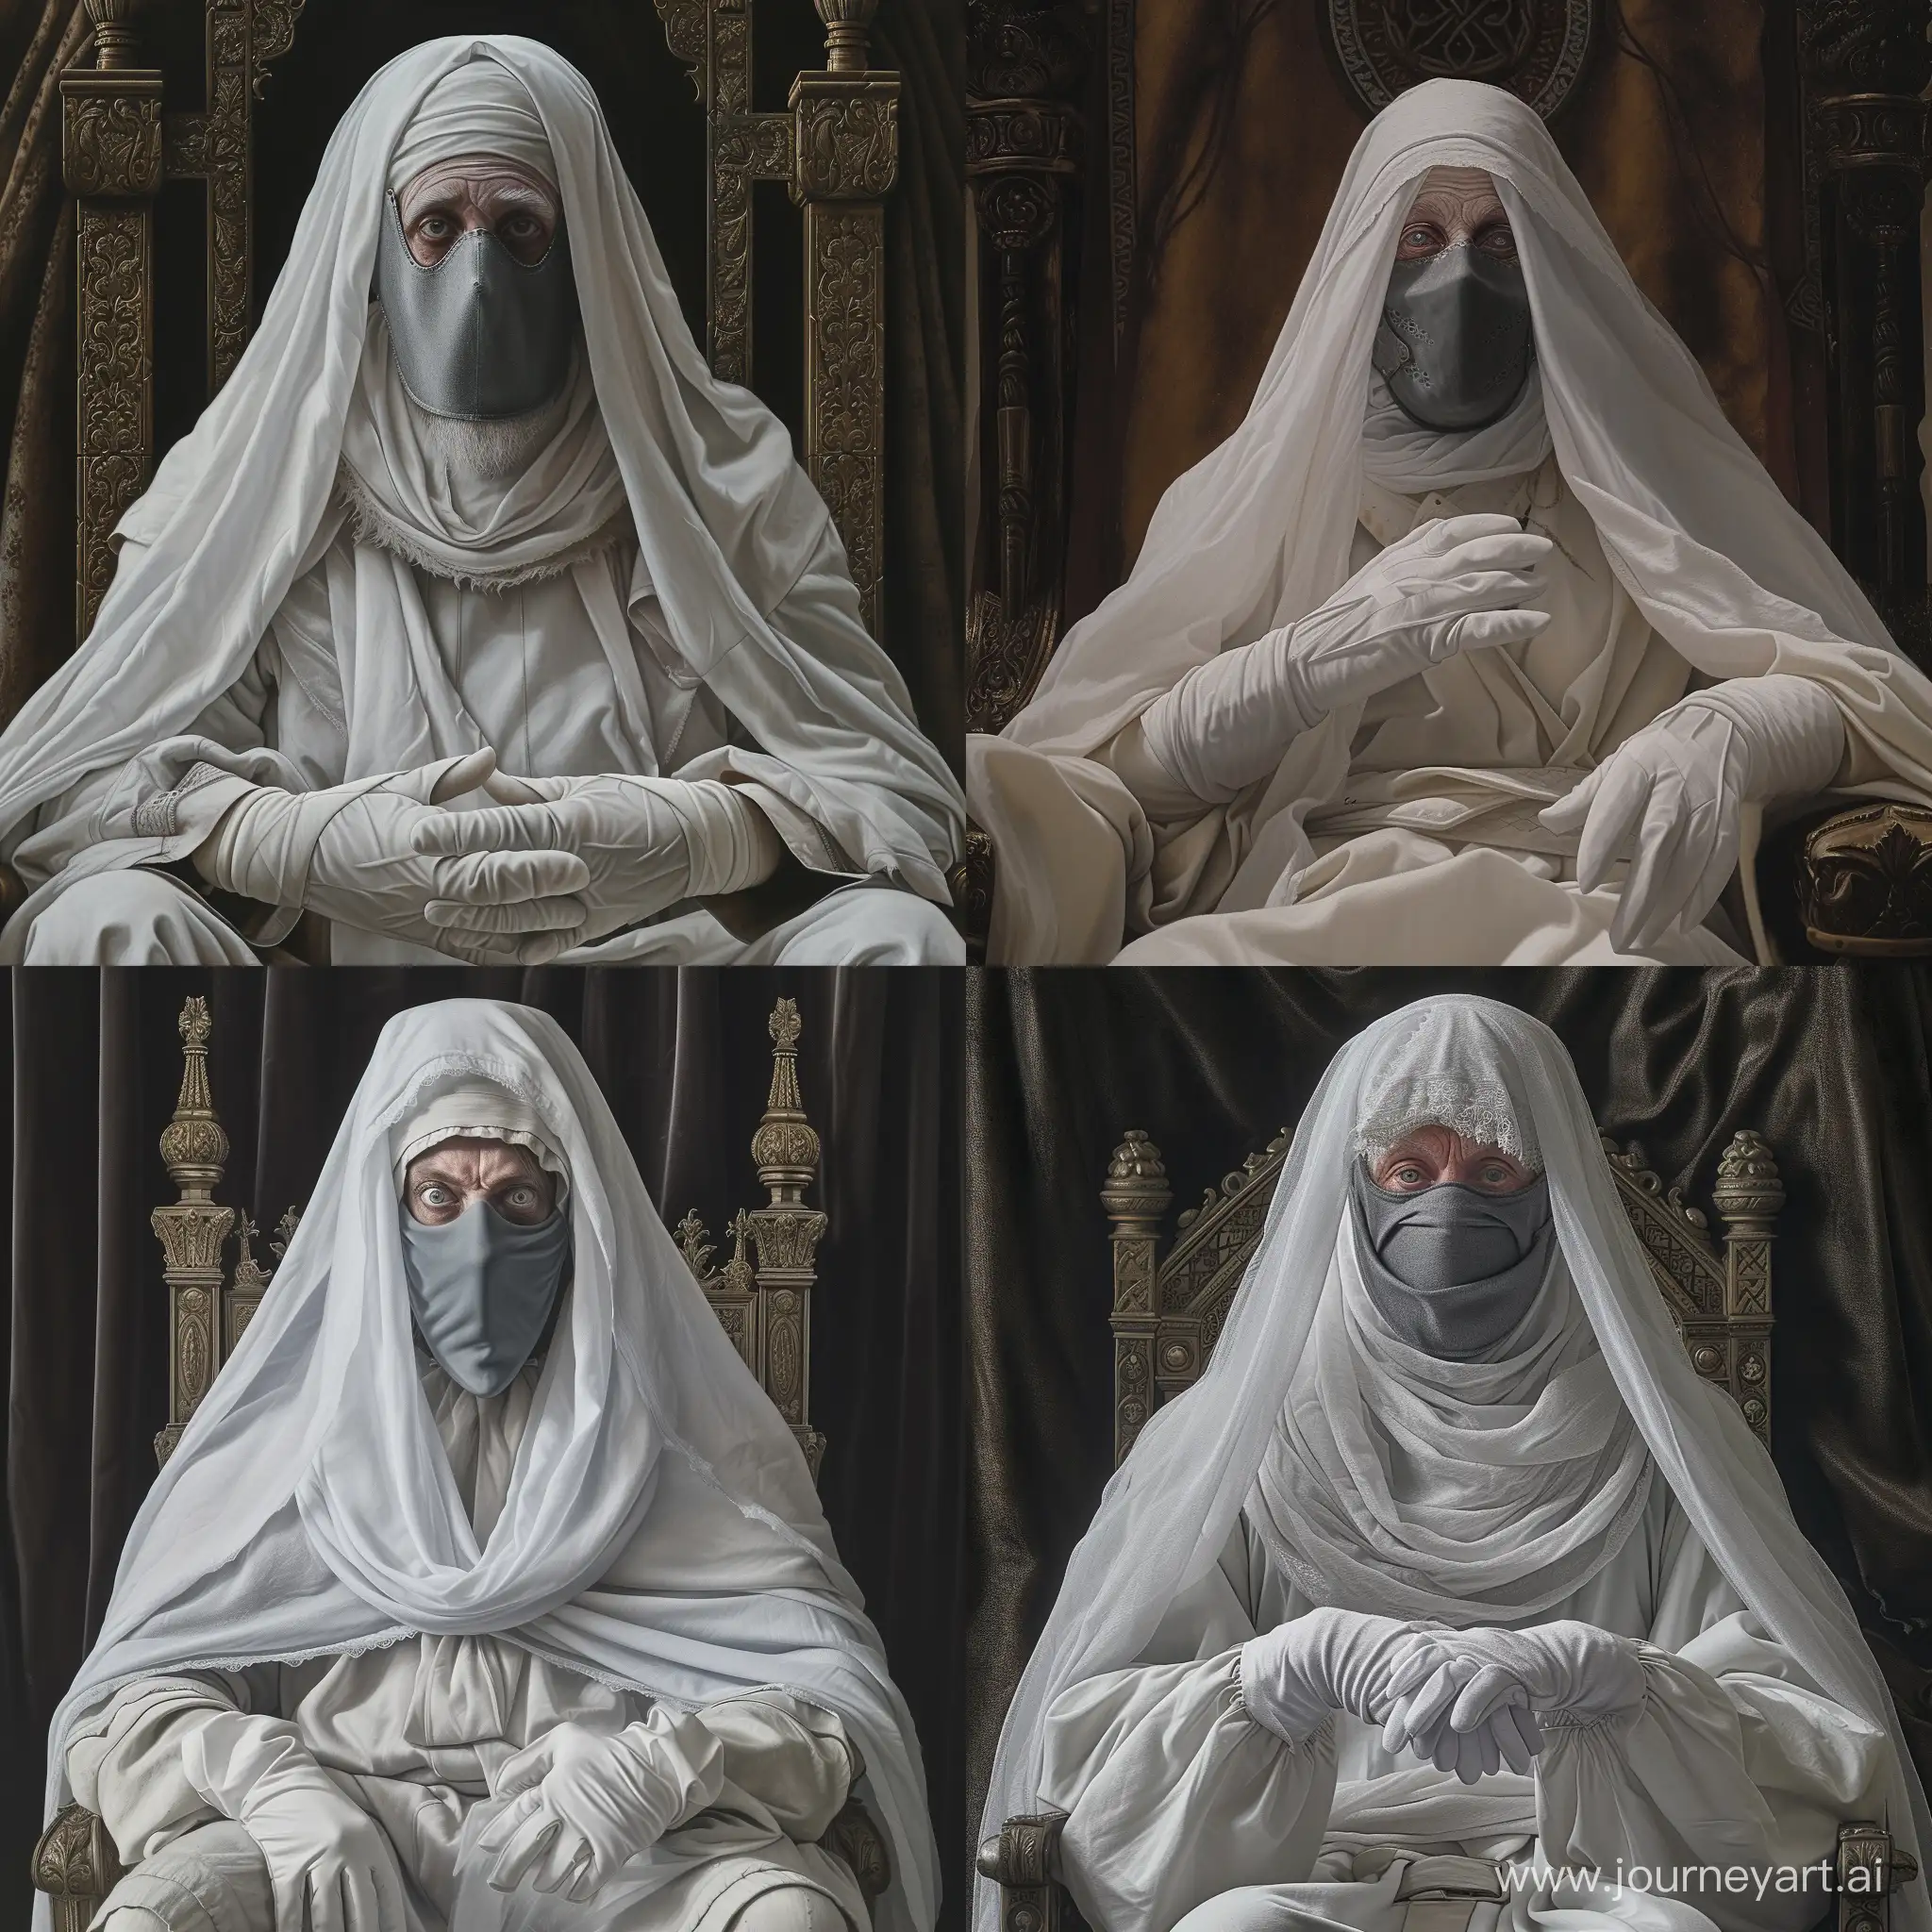 A portrait of King Baldwin IV of Jerusalem. He is wearing face covering gray mask, white veil, white robe and white gloves. Sitting on throne. His eyes are pale and sick. Realistic image.